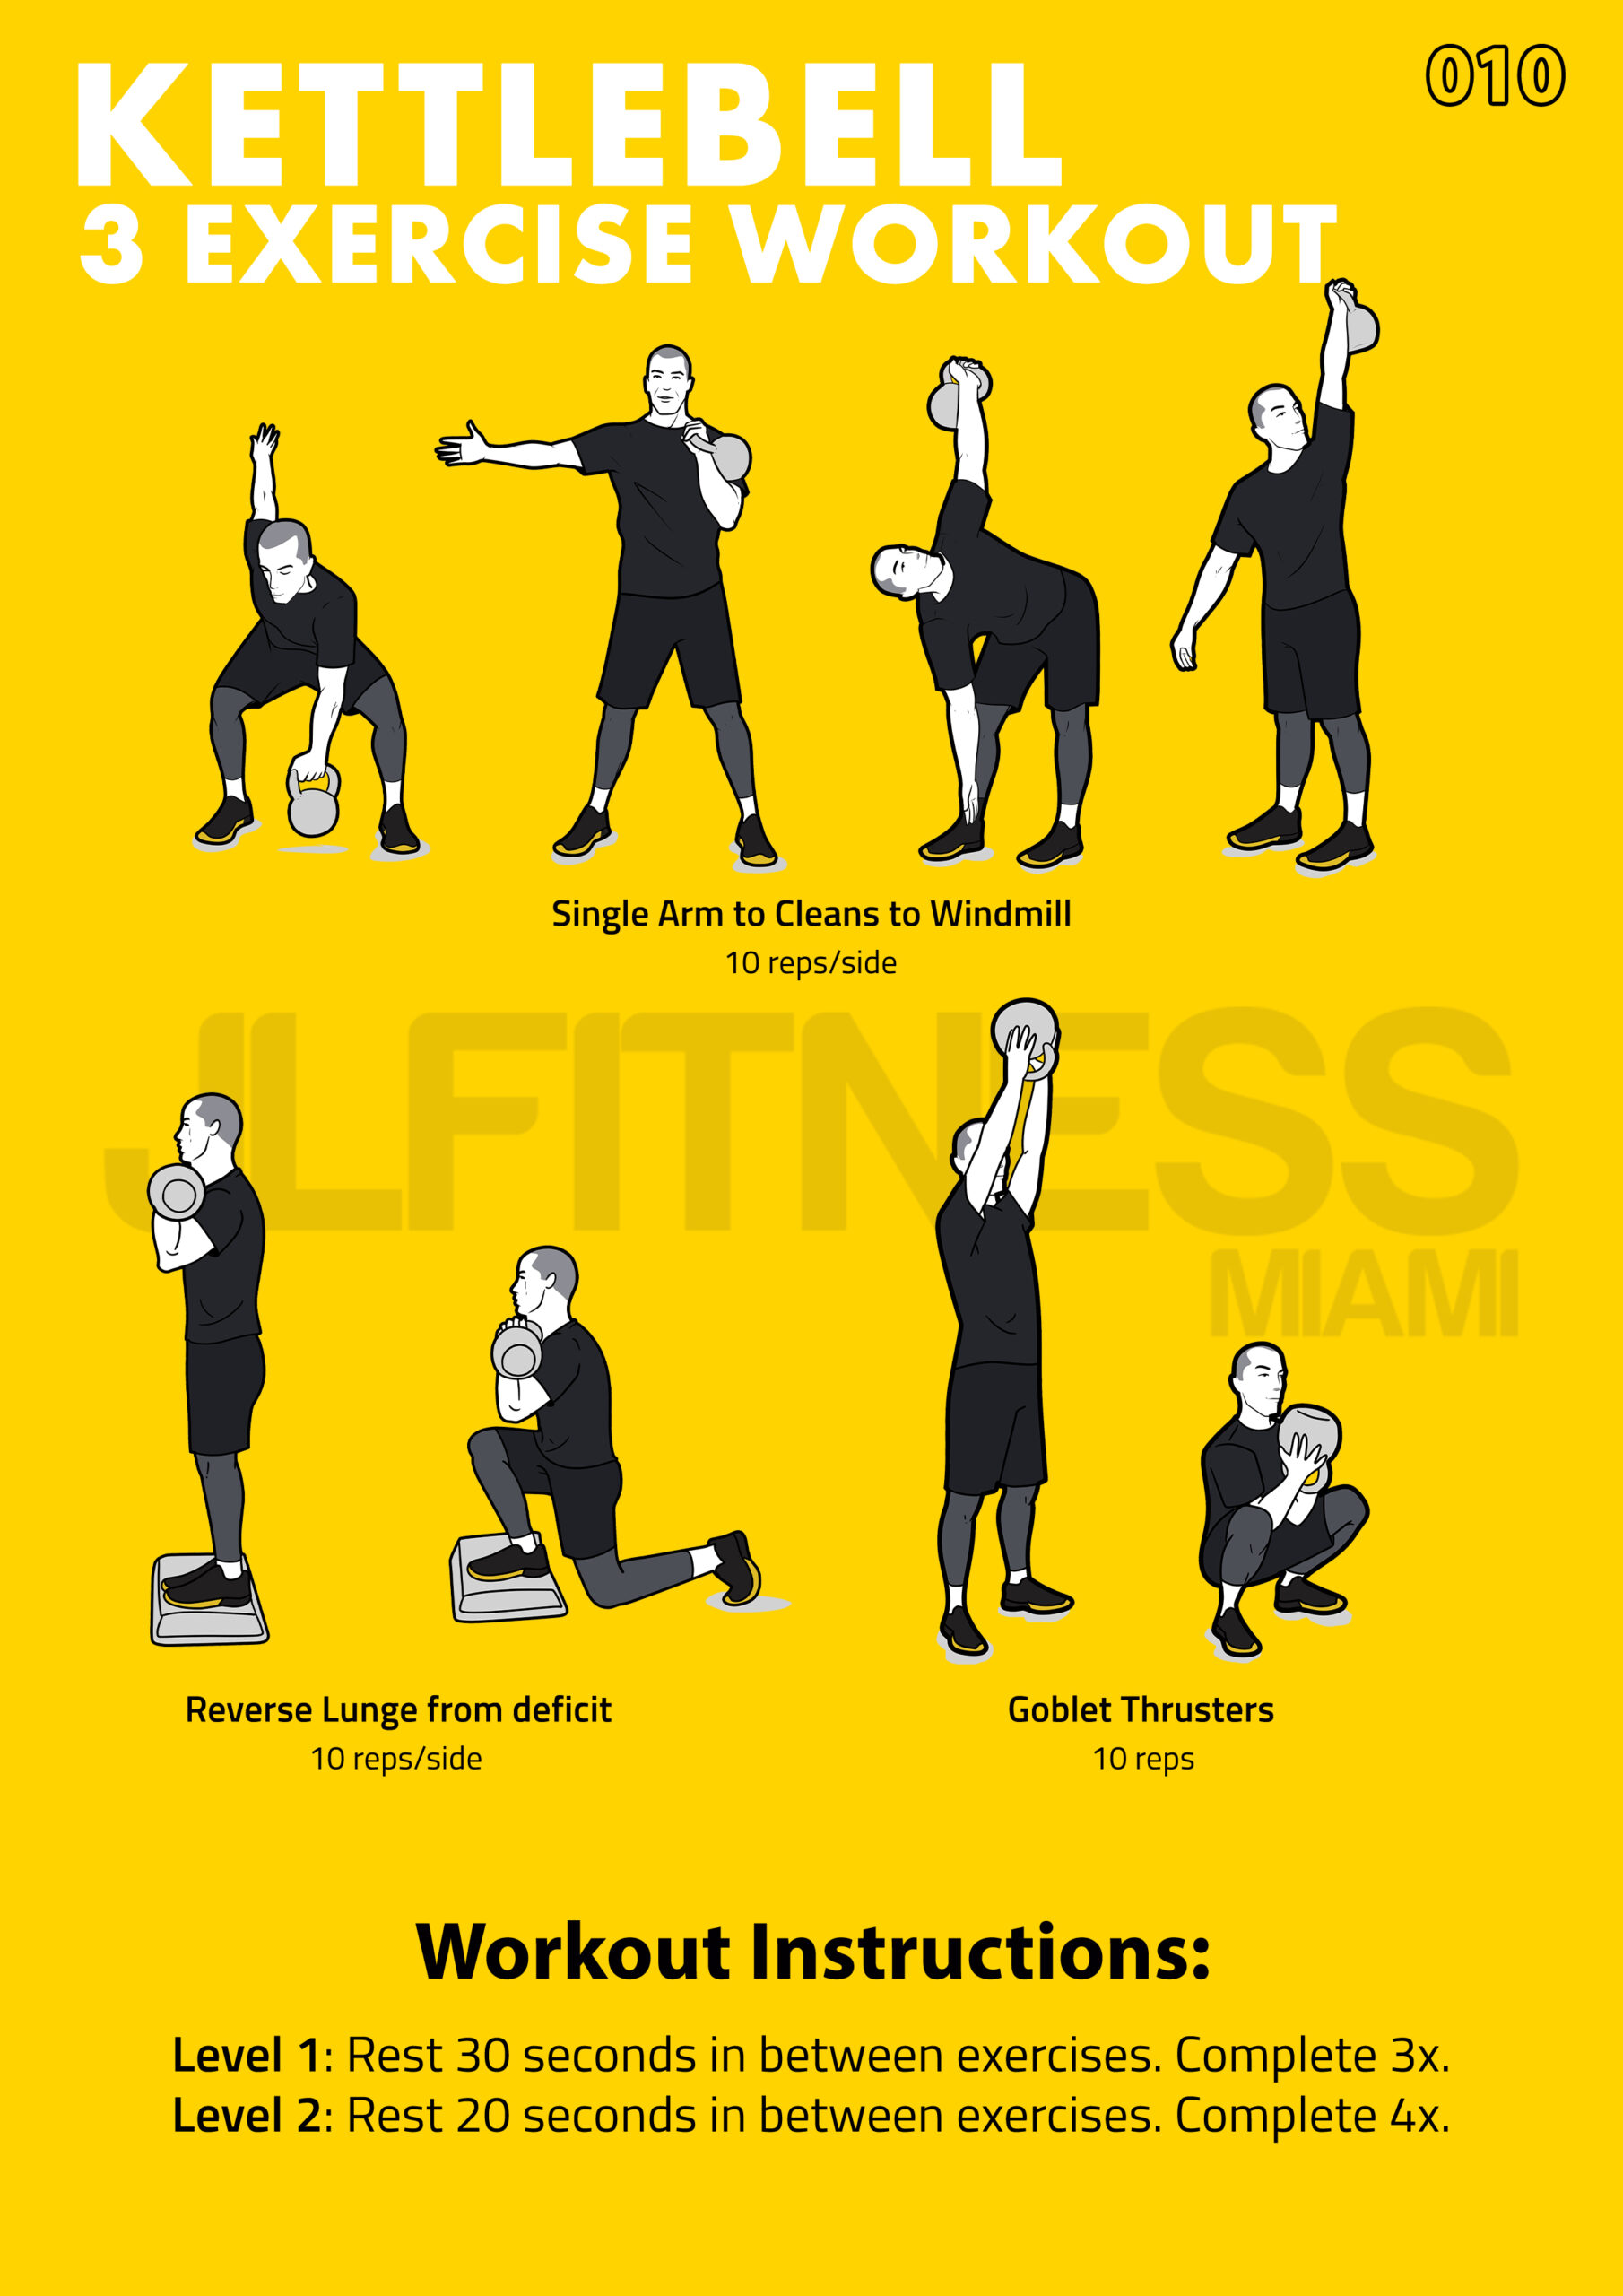 kettlebell workout with 3 exercises